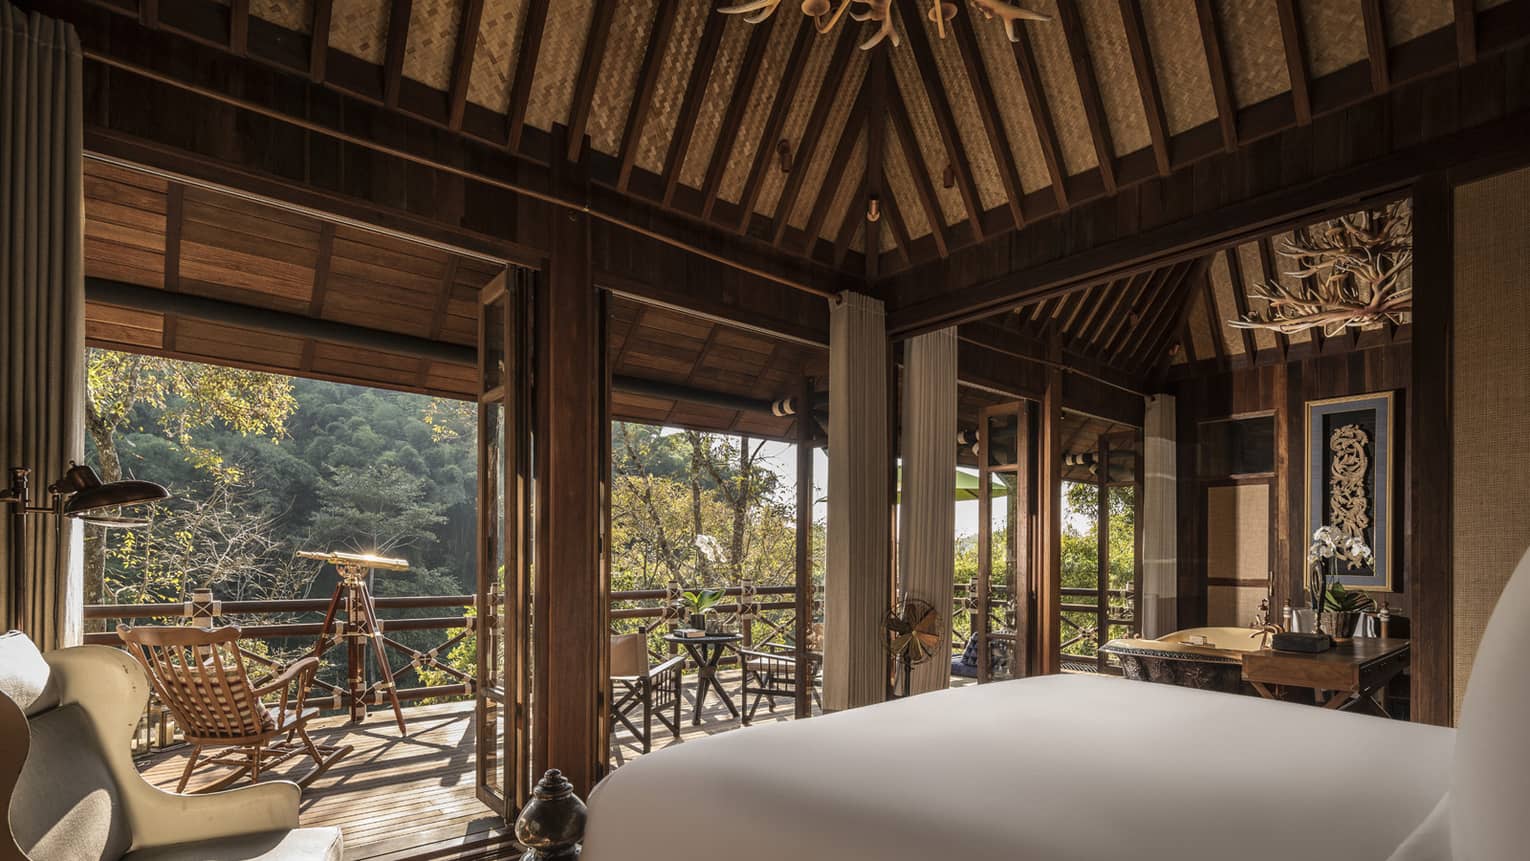 Hotel bed with white linens in open air cabin overlooking jungle